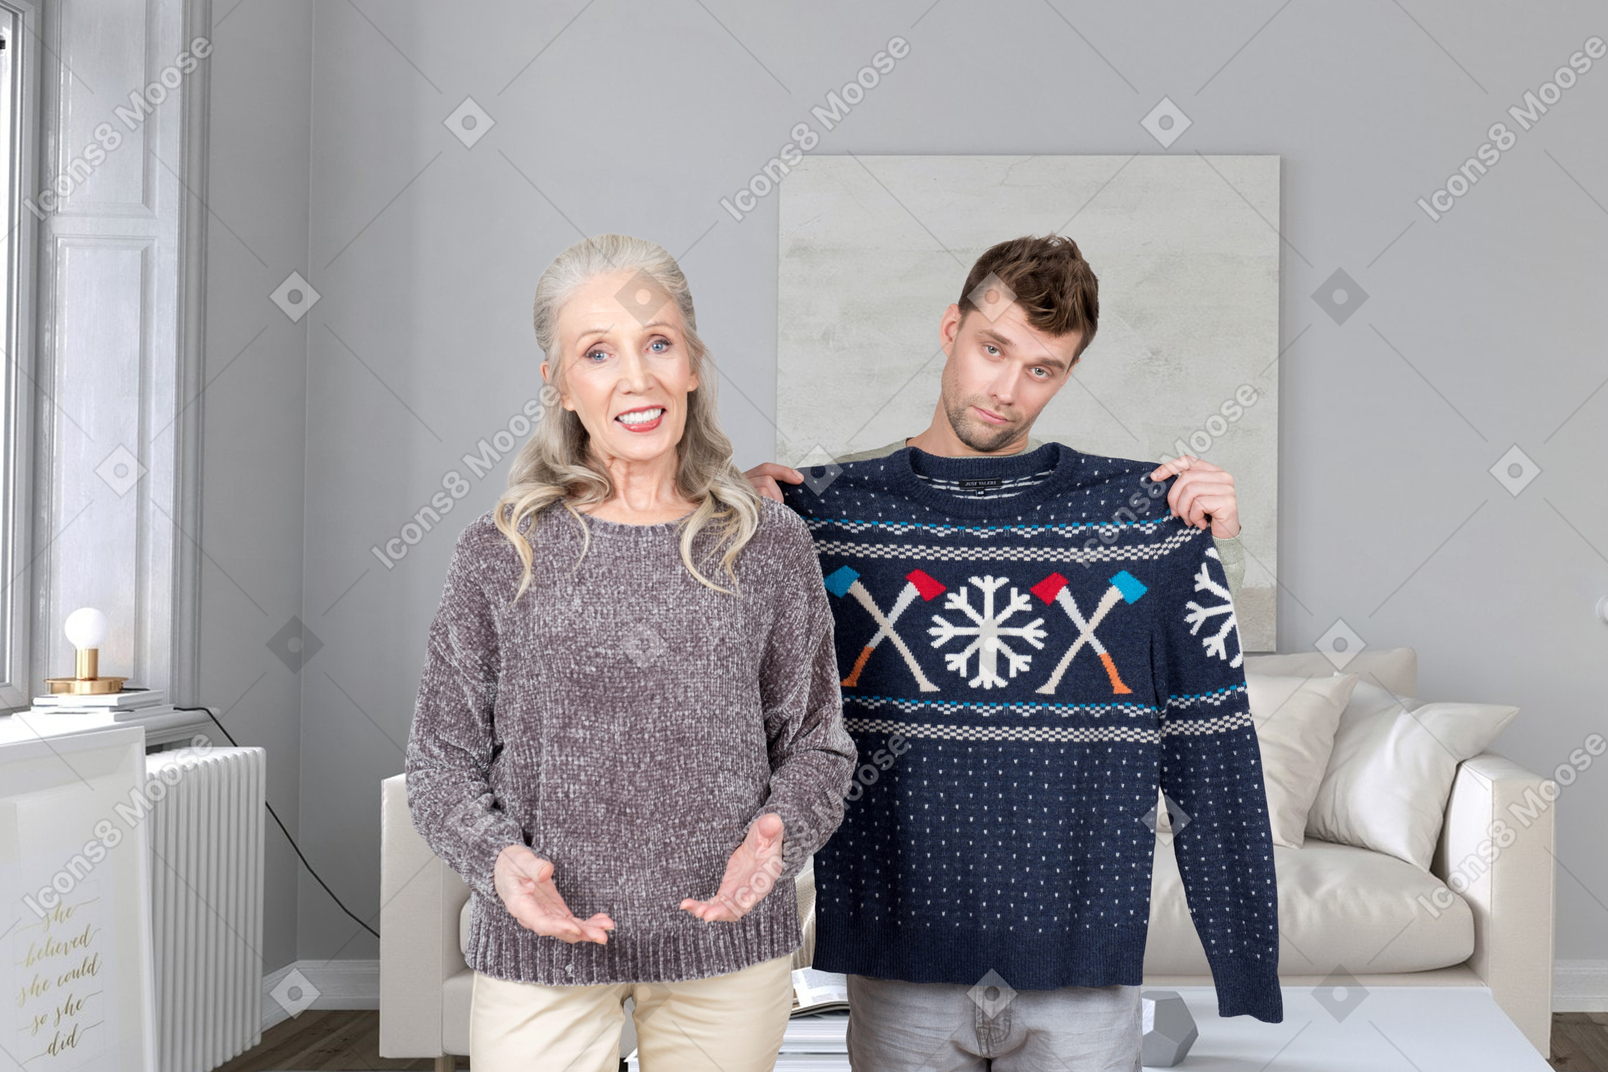 Elderly woman standing next to man holding christmas sweater